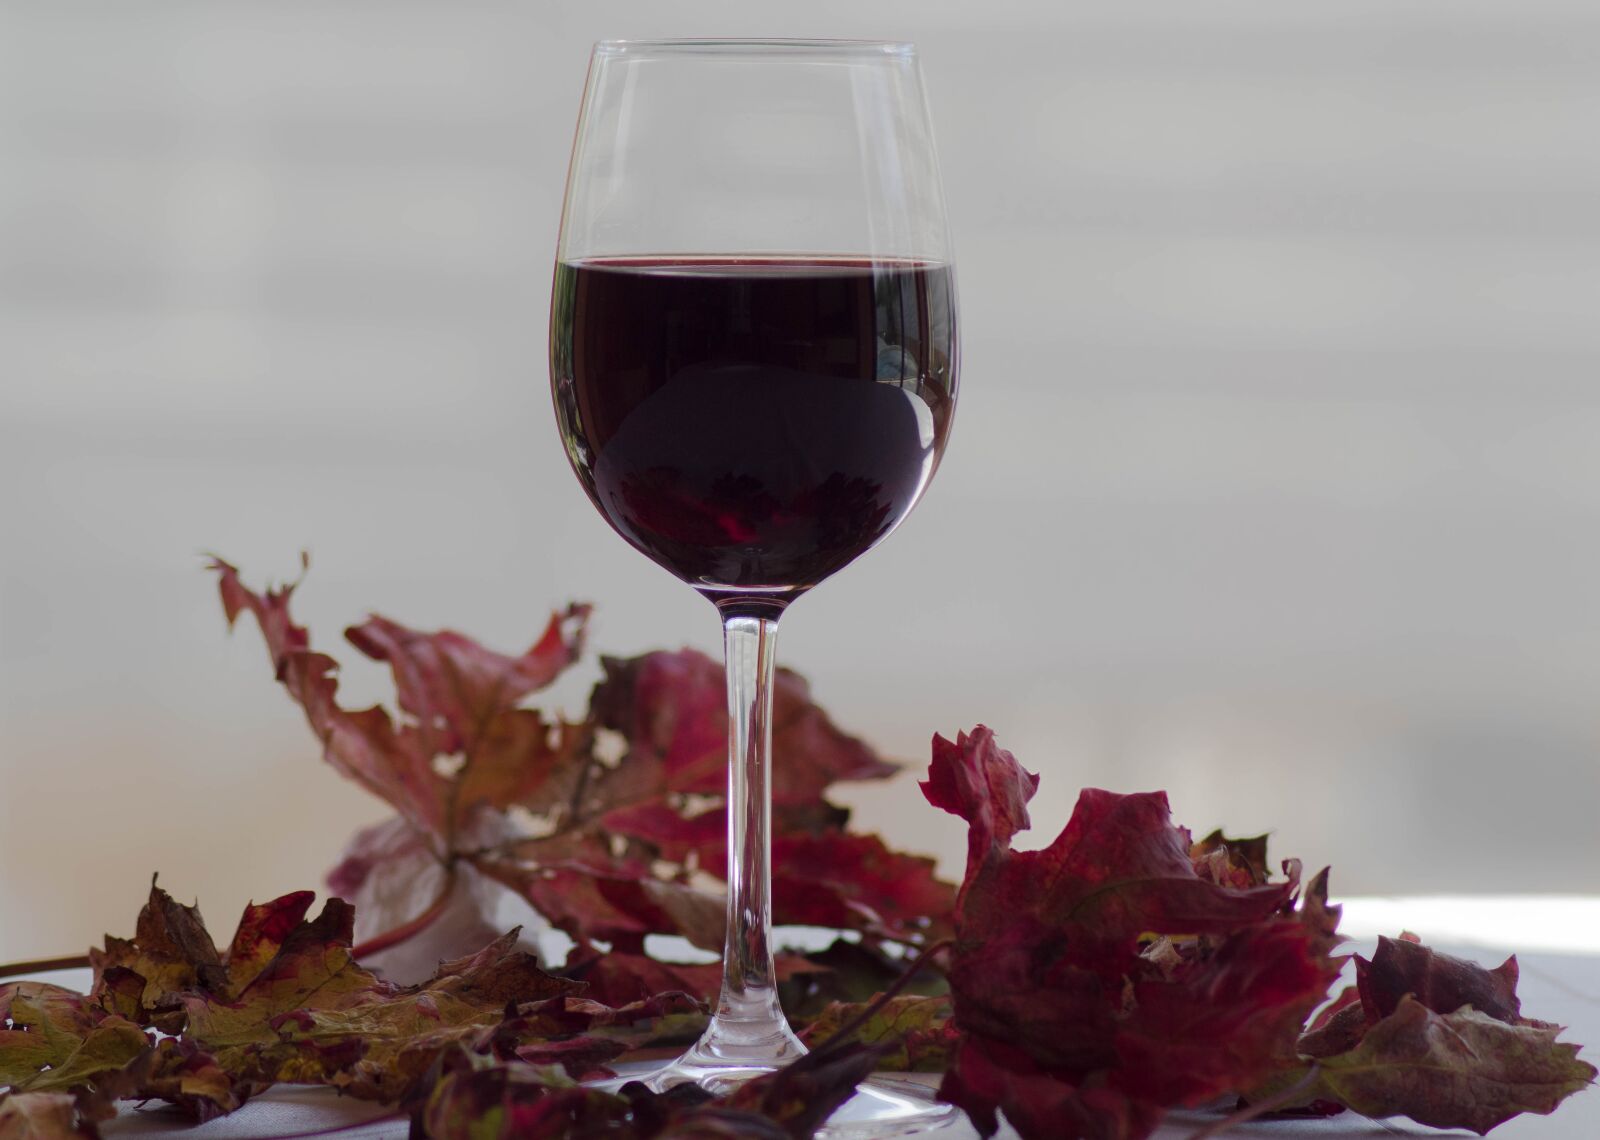 Tamron AF 70-300mm F4-5.6 Di LD Macro sample photo. Glass, wine, leaves photography